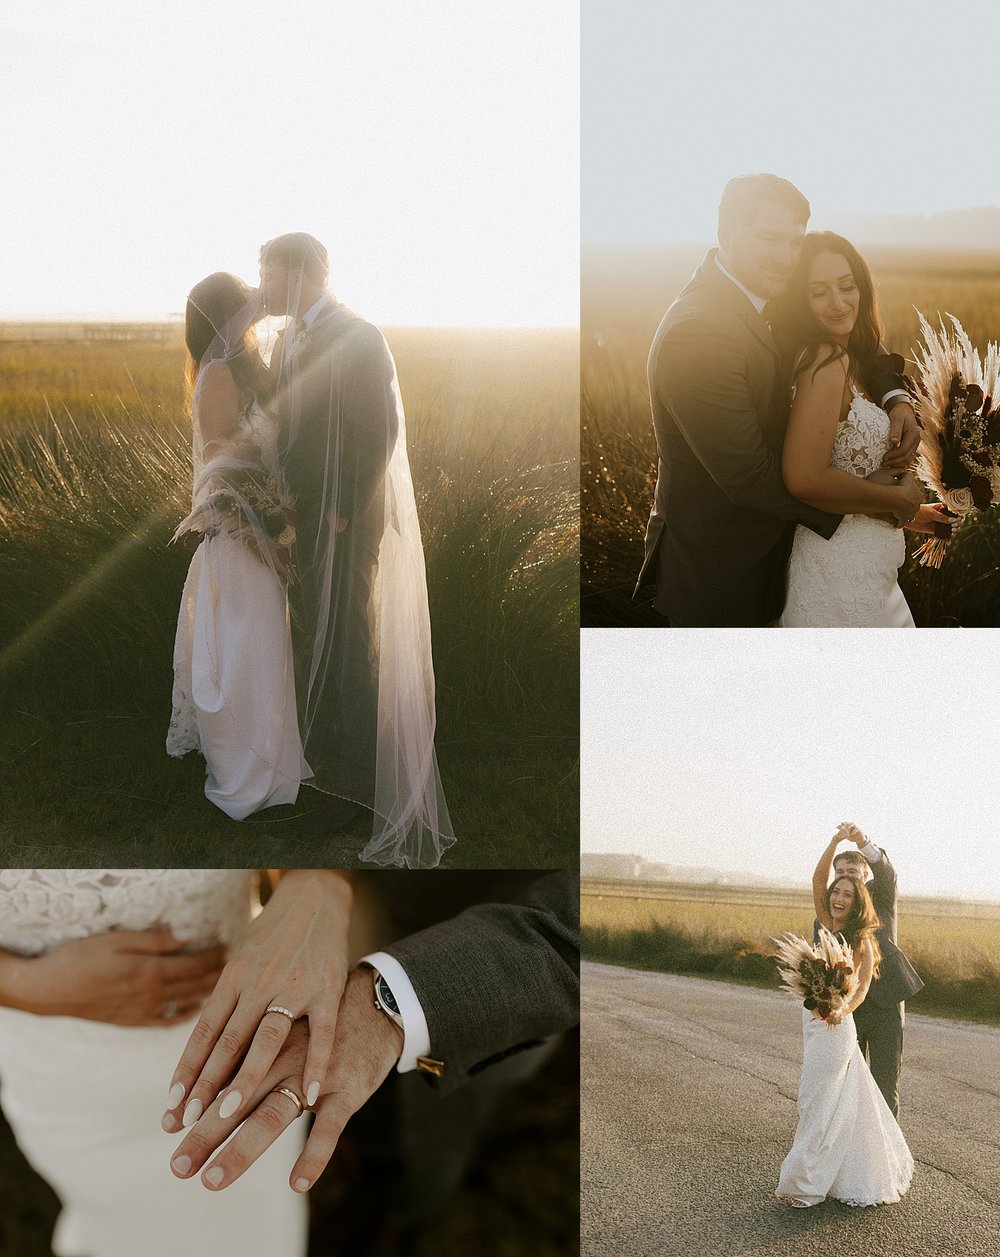  Newlyweds stand together during golden hour by Steph Photo Co 